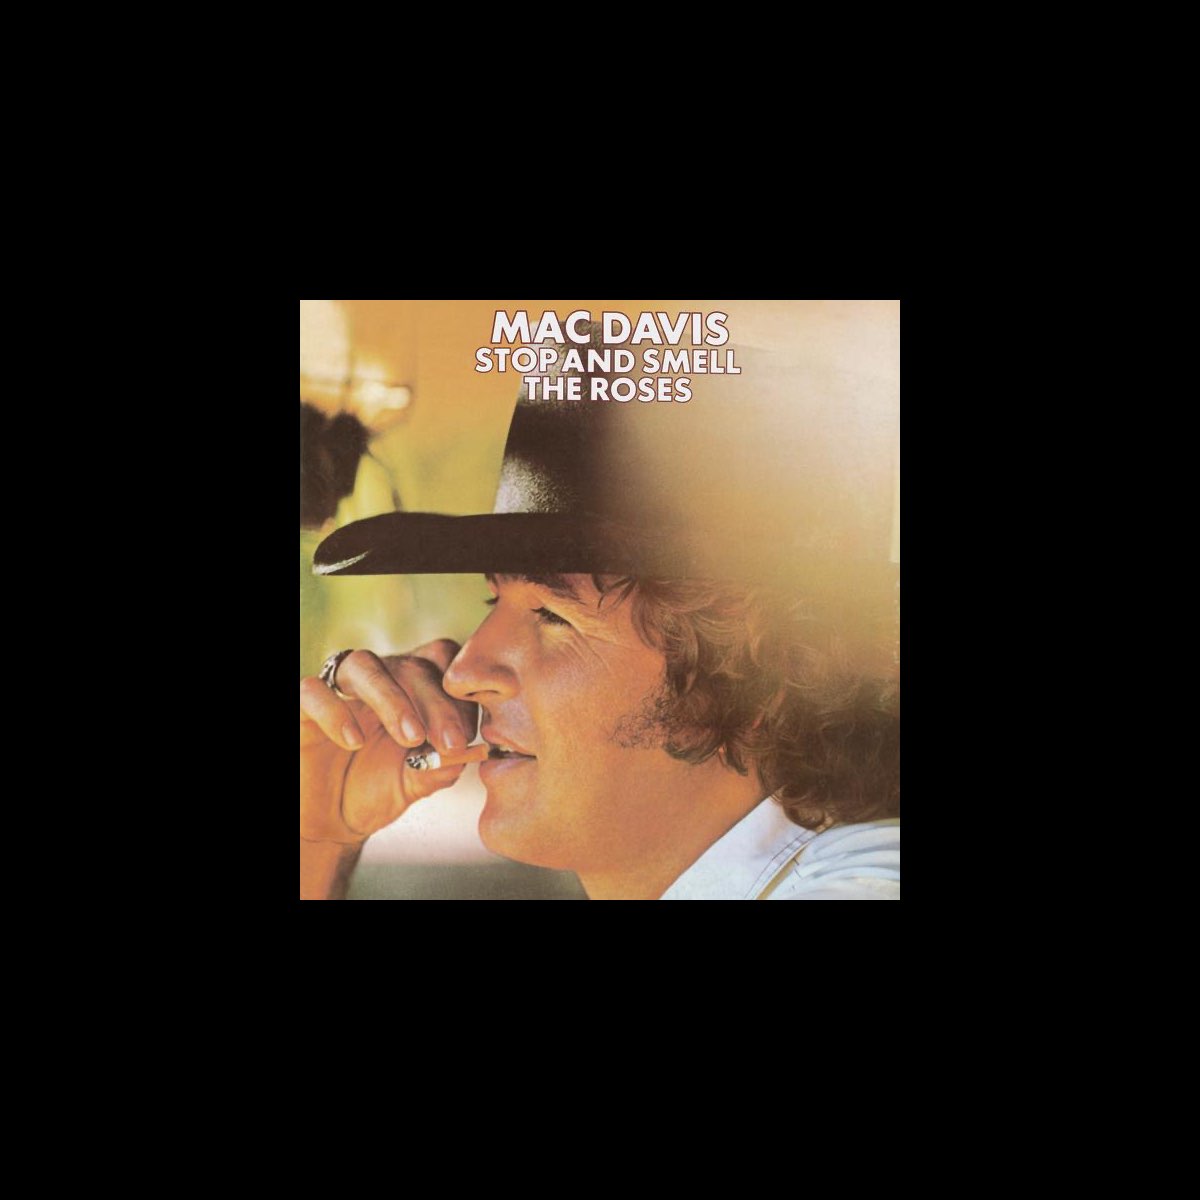 Stop and Smell the Roses by Mac Davis on Apple Music